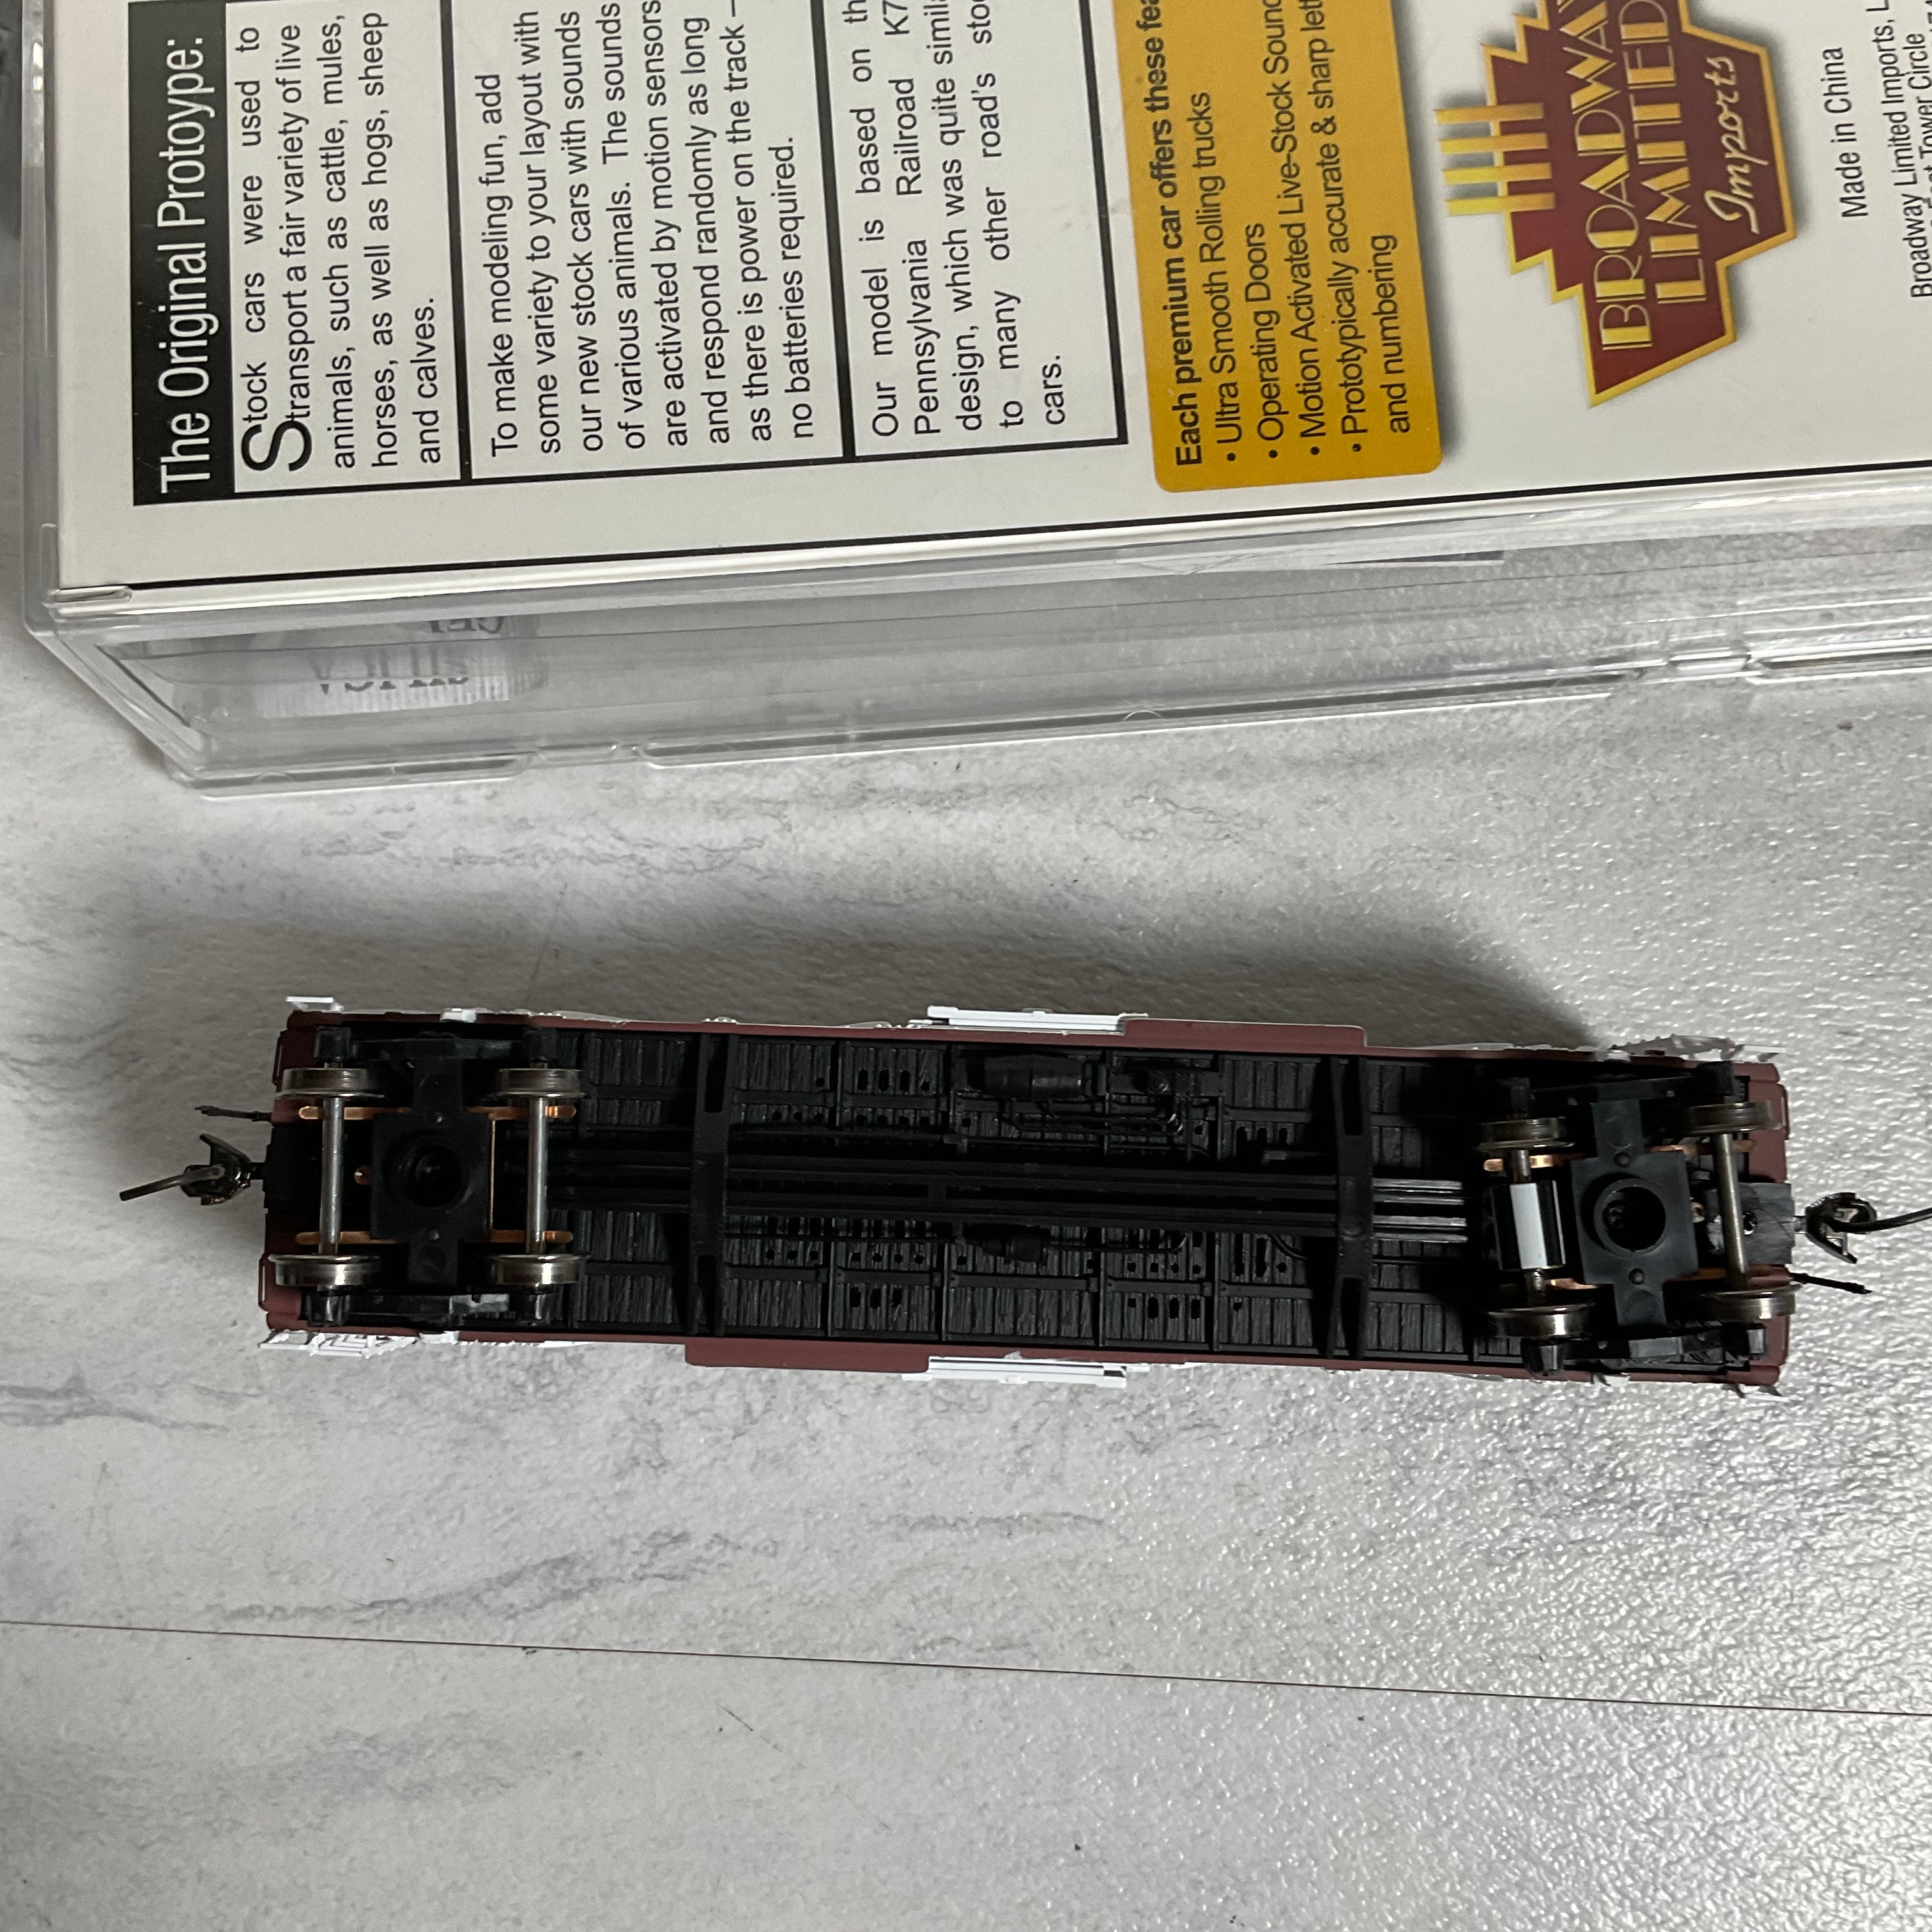 Broadway Limited 2521 HO Scale Stock Car w/Cattle Sounds, CN (7329261060334)